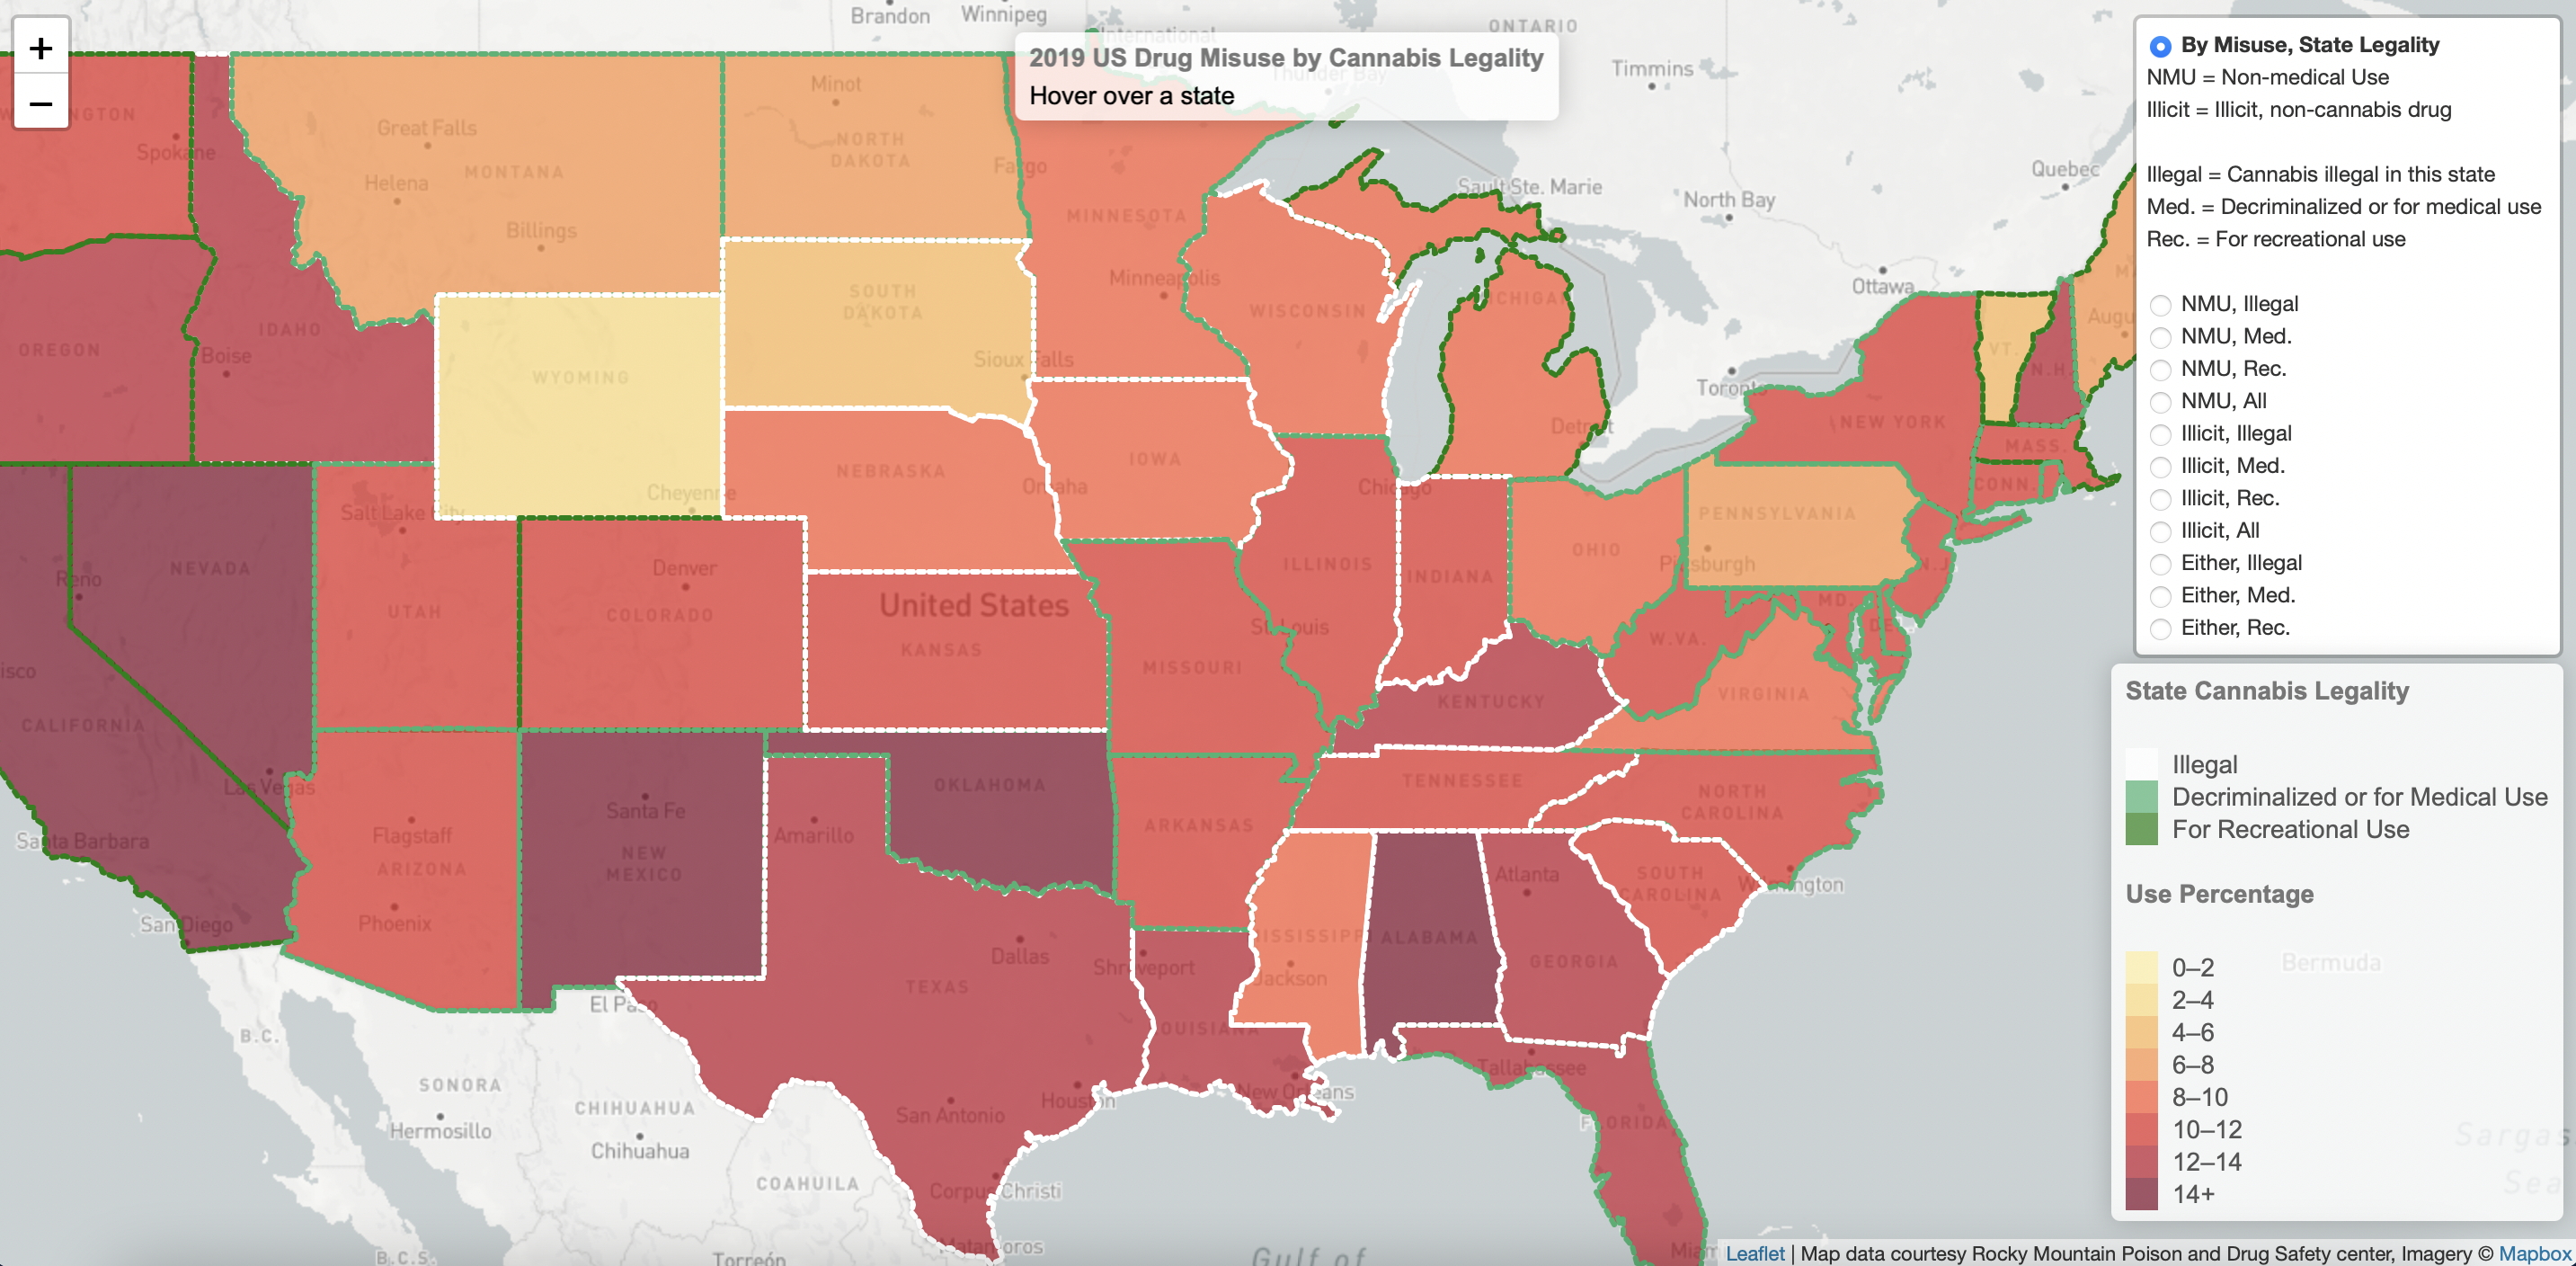 Map of 2019 US State Drug Misuse by Cannabis Legality